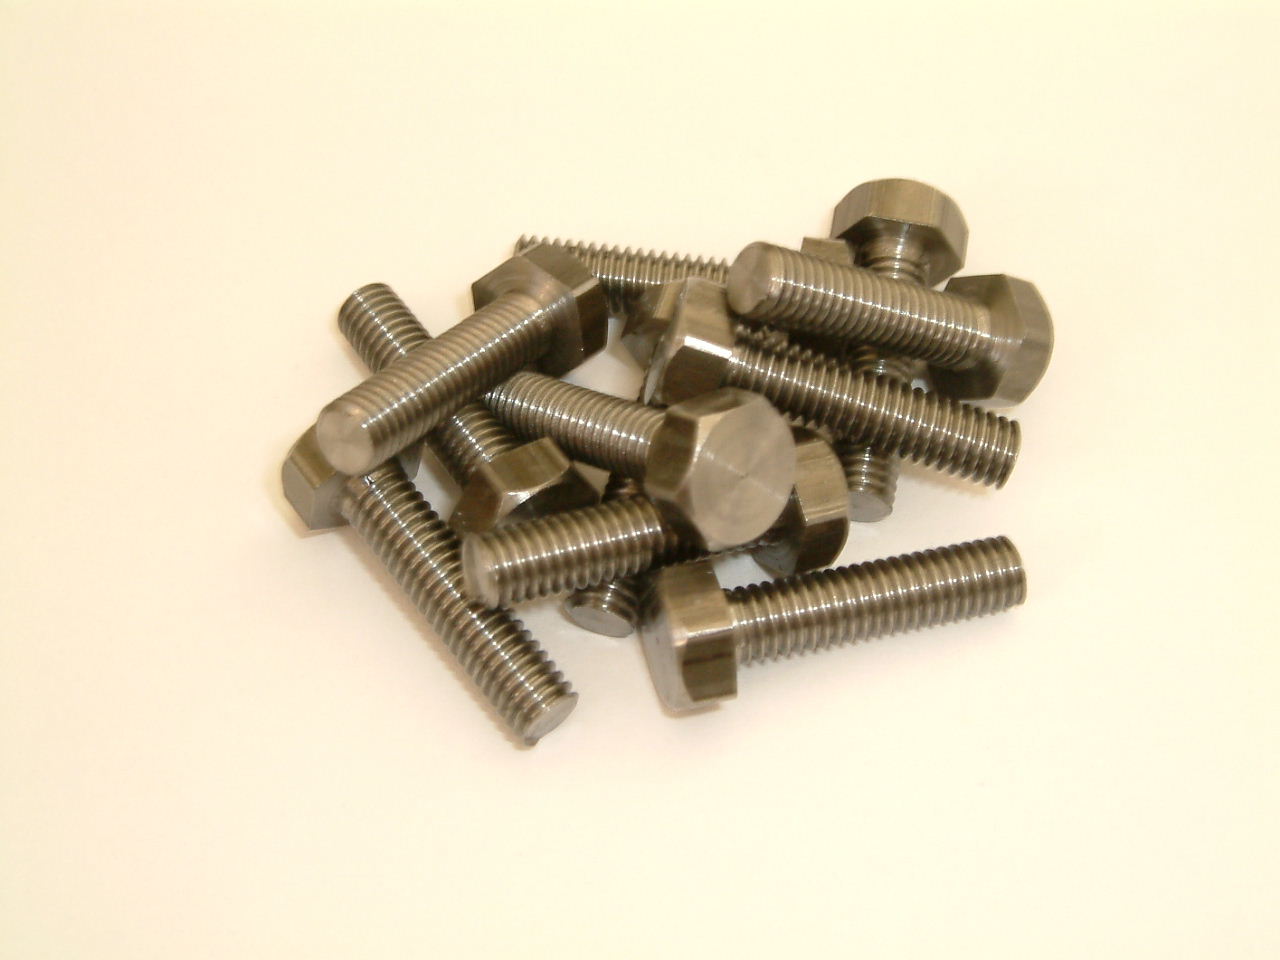 1/4" Whitworth x 2" Bolts with nuts and washers Pack of 3 of Each BZP M&J 7746 